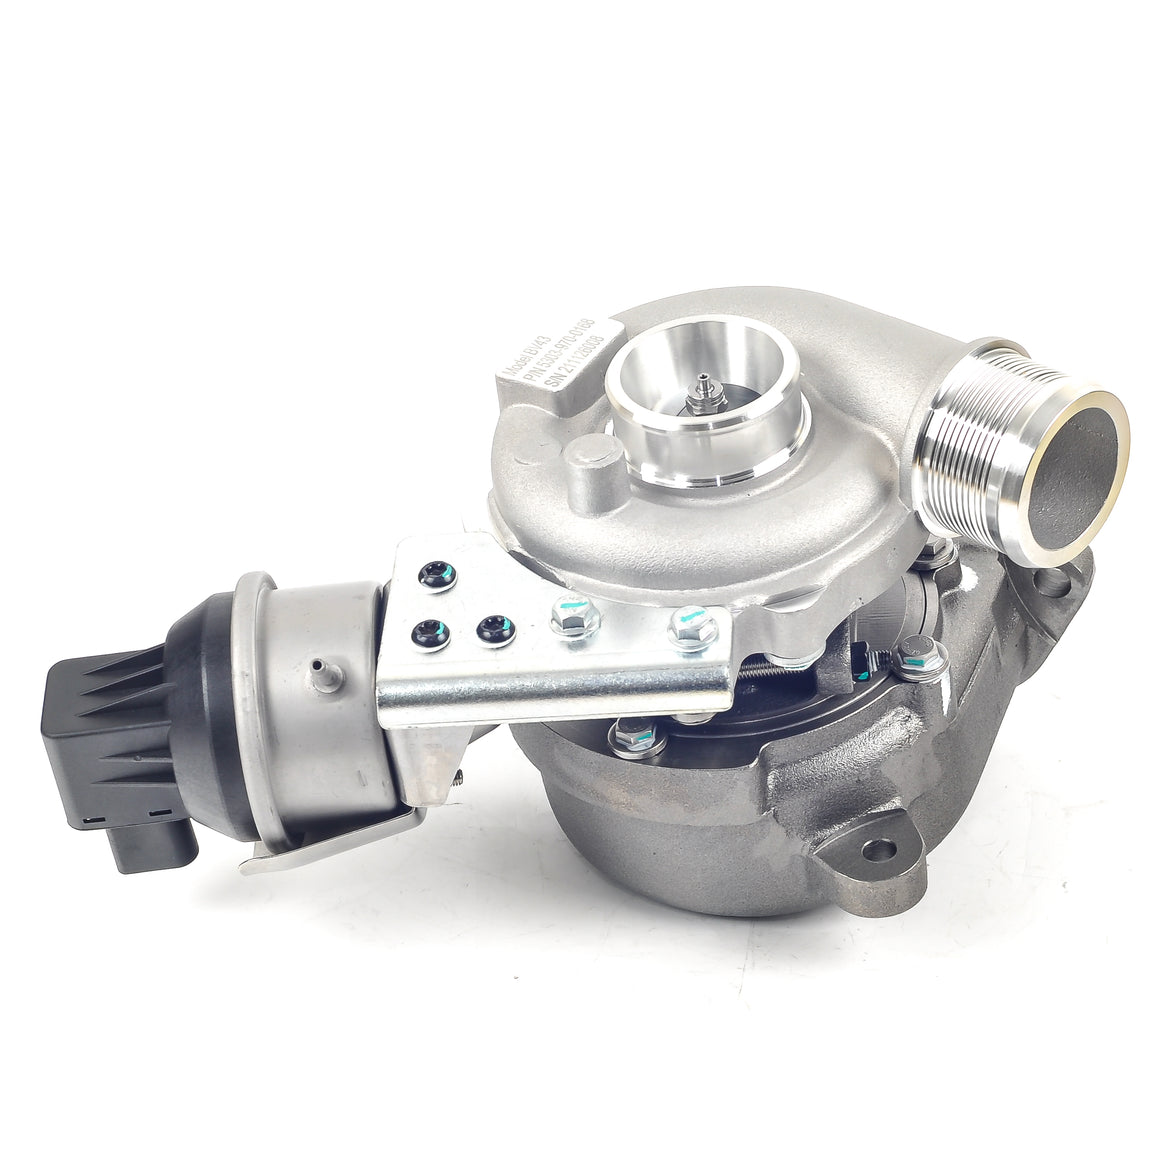 CCT Turbocharger for Great Wall Haval H6 V200 GW4D20 2.0L